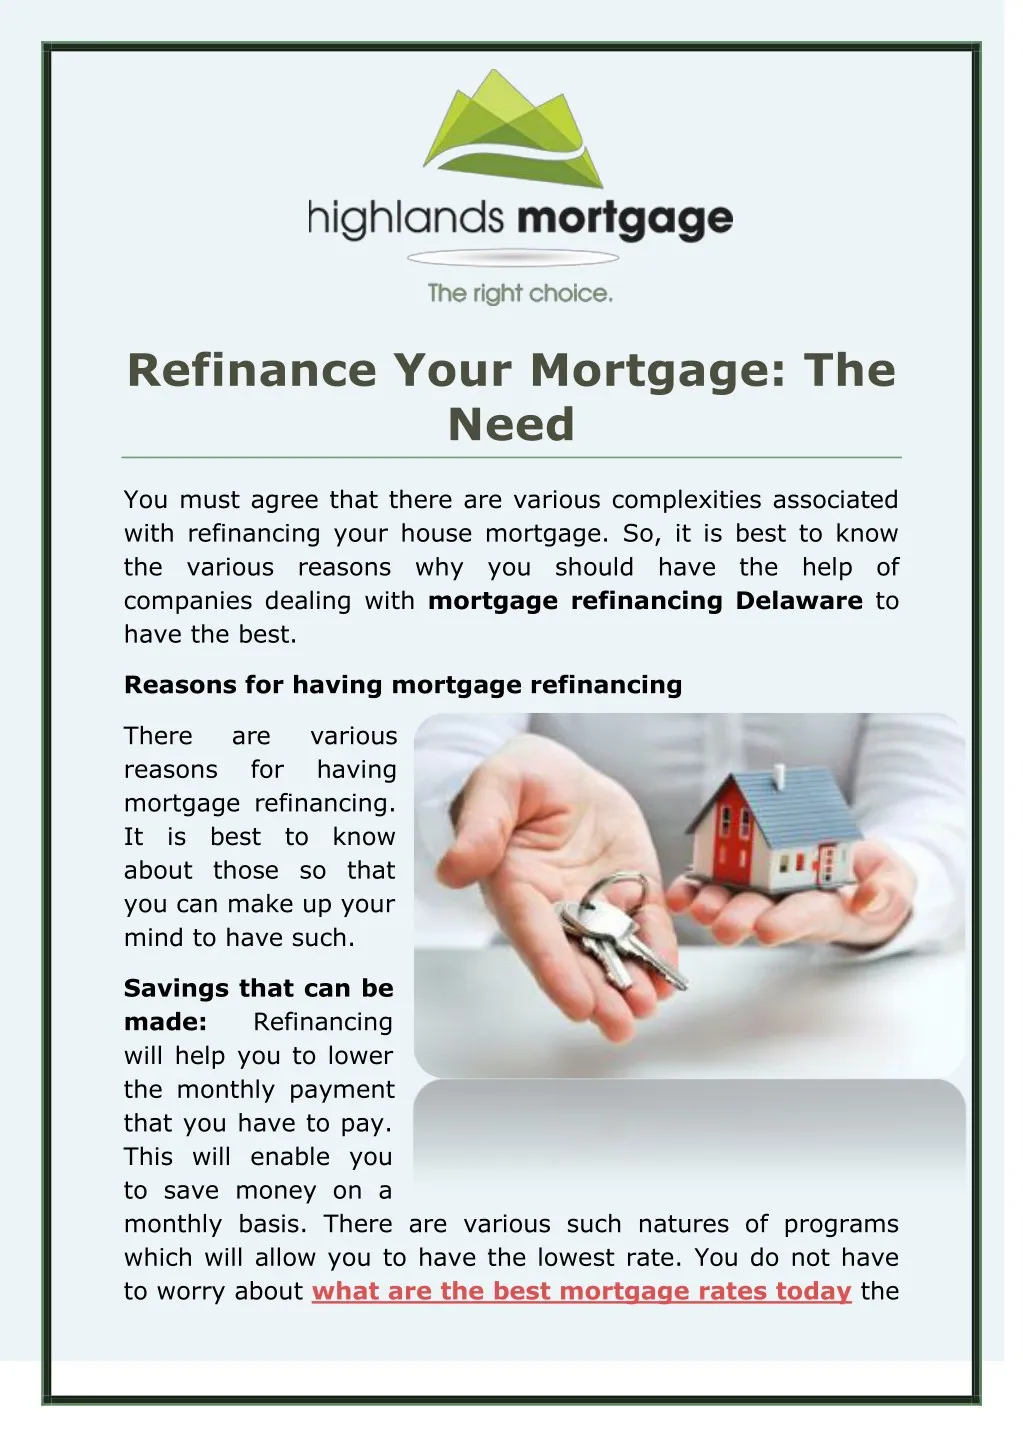 refinance your mortgage the need